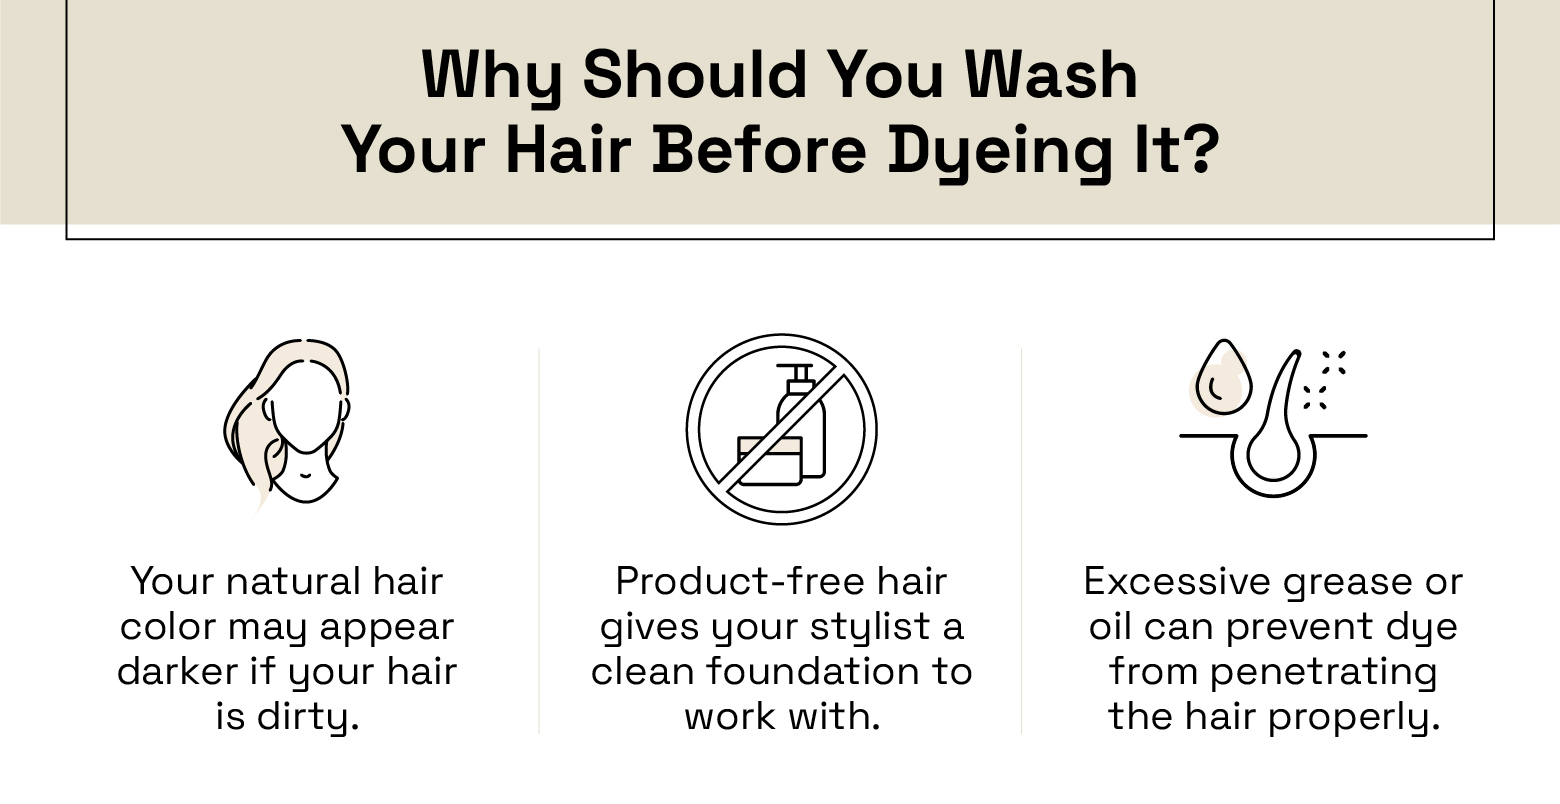 why should you wash hair before dyeing it